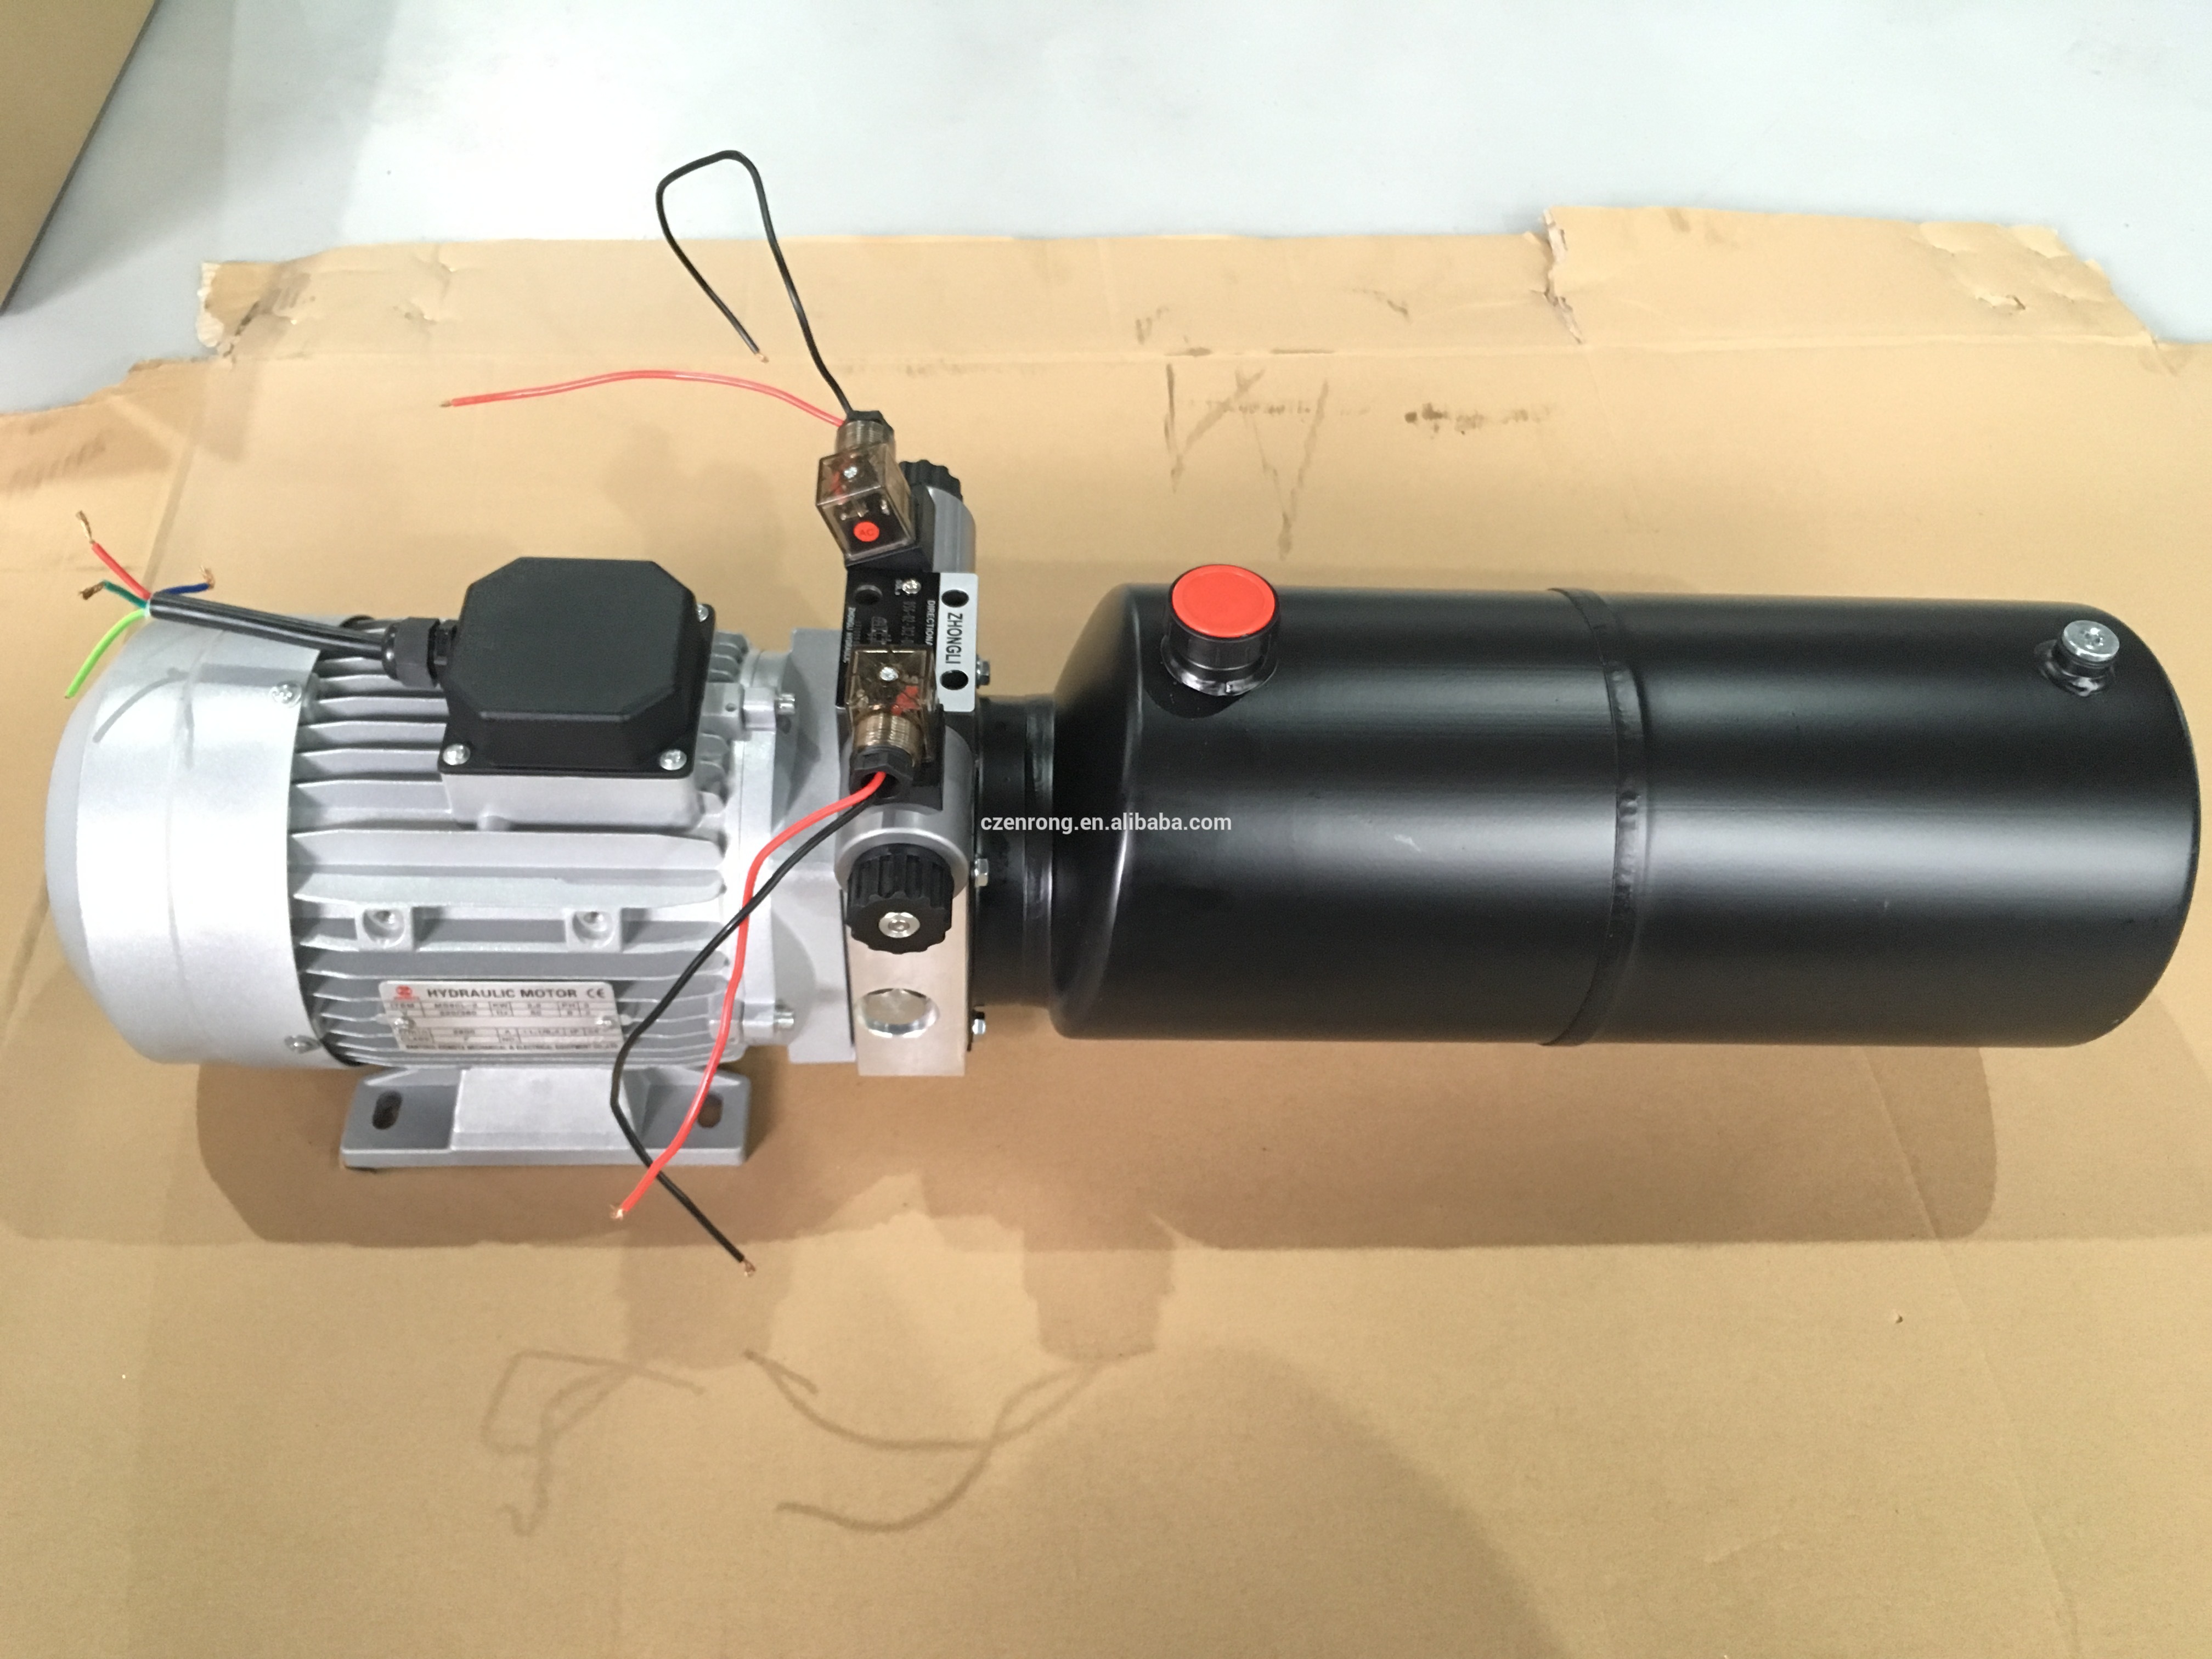 AC Hydraulic power unit for double action